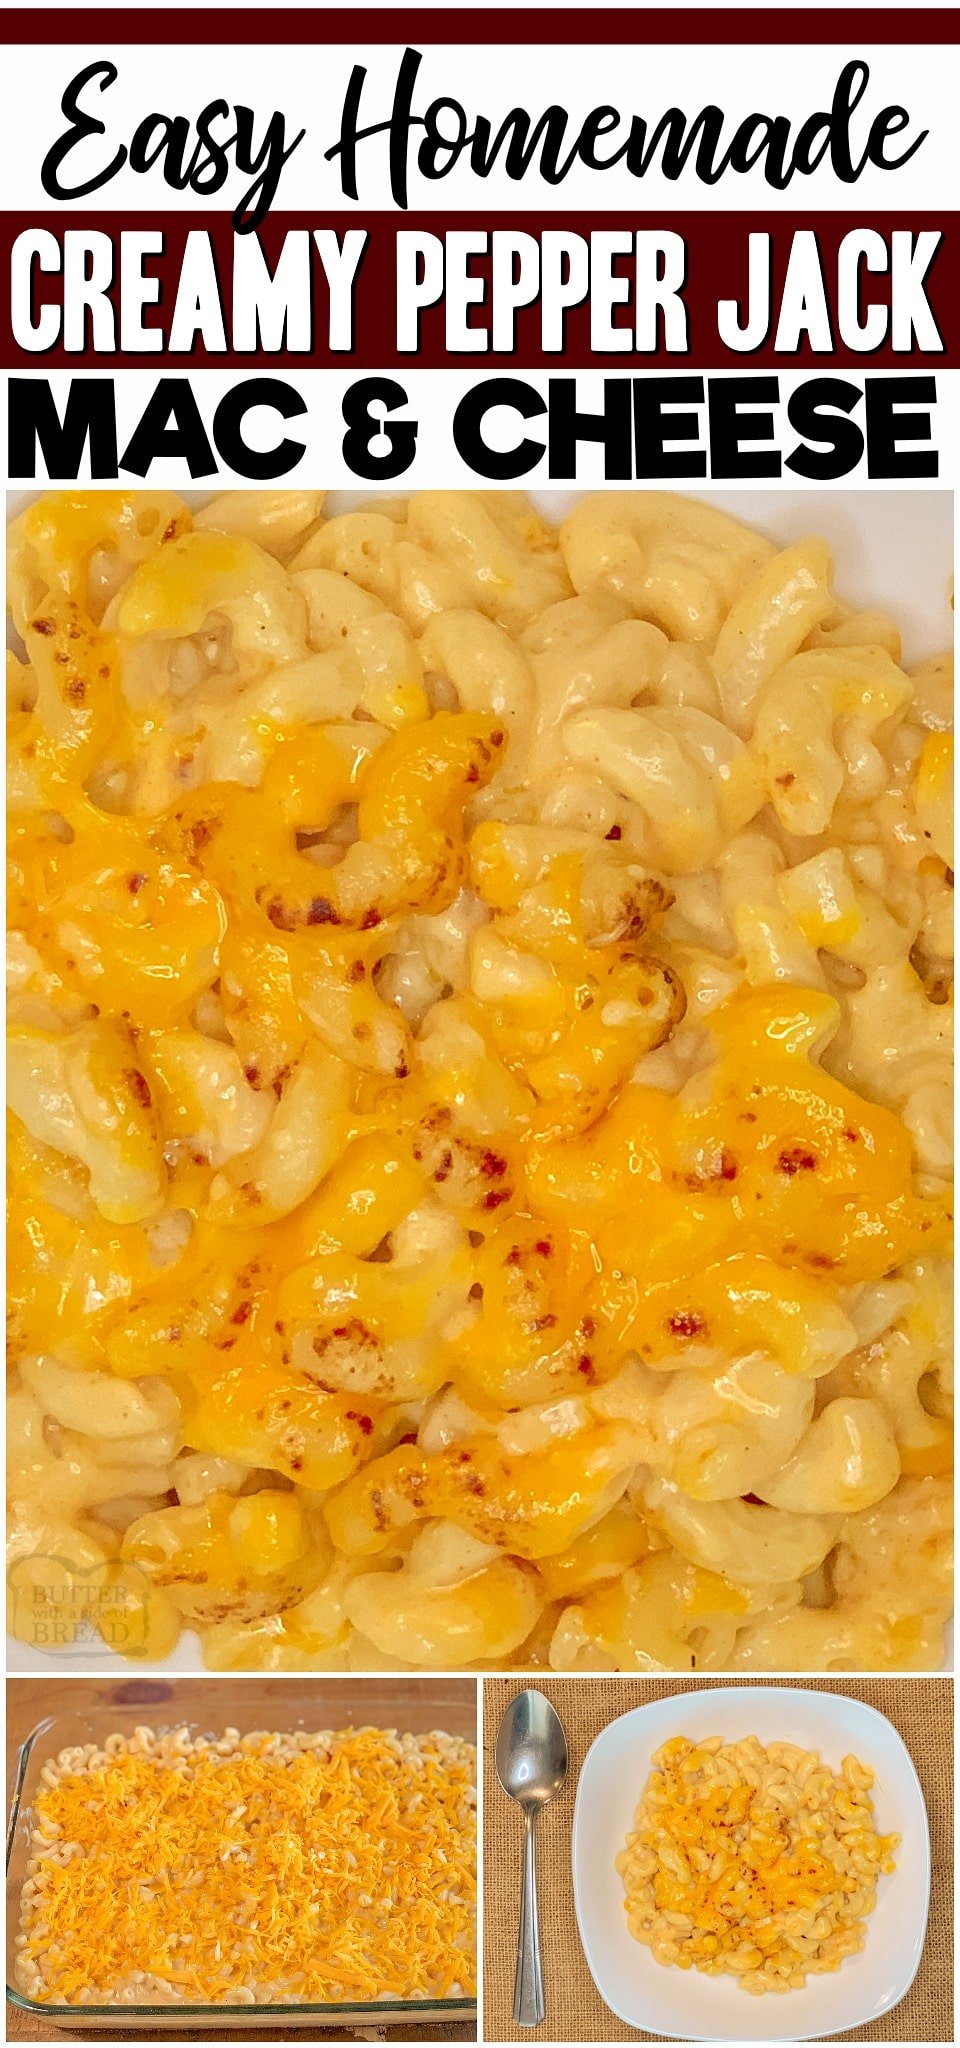 Pepper Jack Mac and Cheese is macaroni with a kick! This 3-cheese homemade mac and cheese recipe is quick & easy enough for weeknight dinner. #pasta #macandcheese #cheese #pepperjack #cheesy #dinner #easyrecipe from BUTTER WITH A SIDE OF BREAD